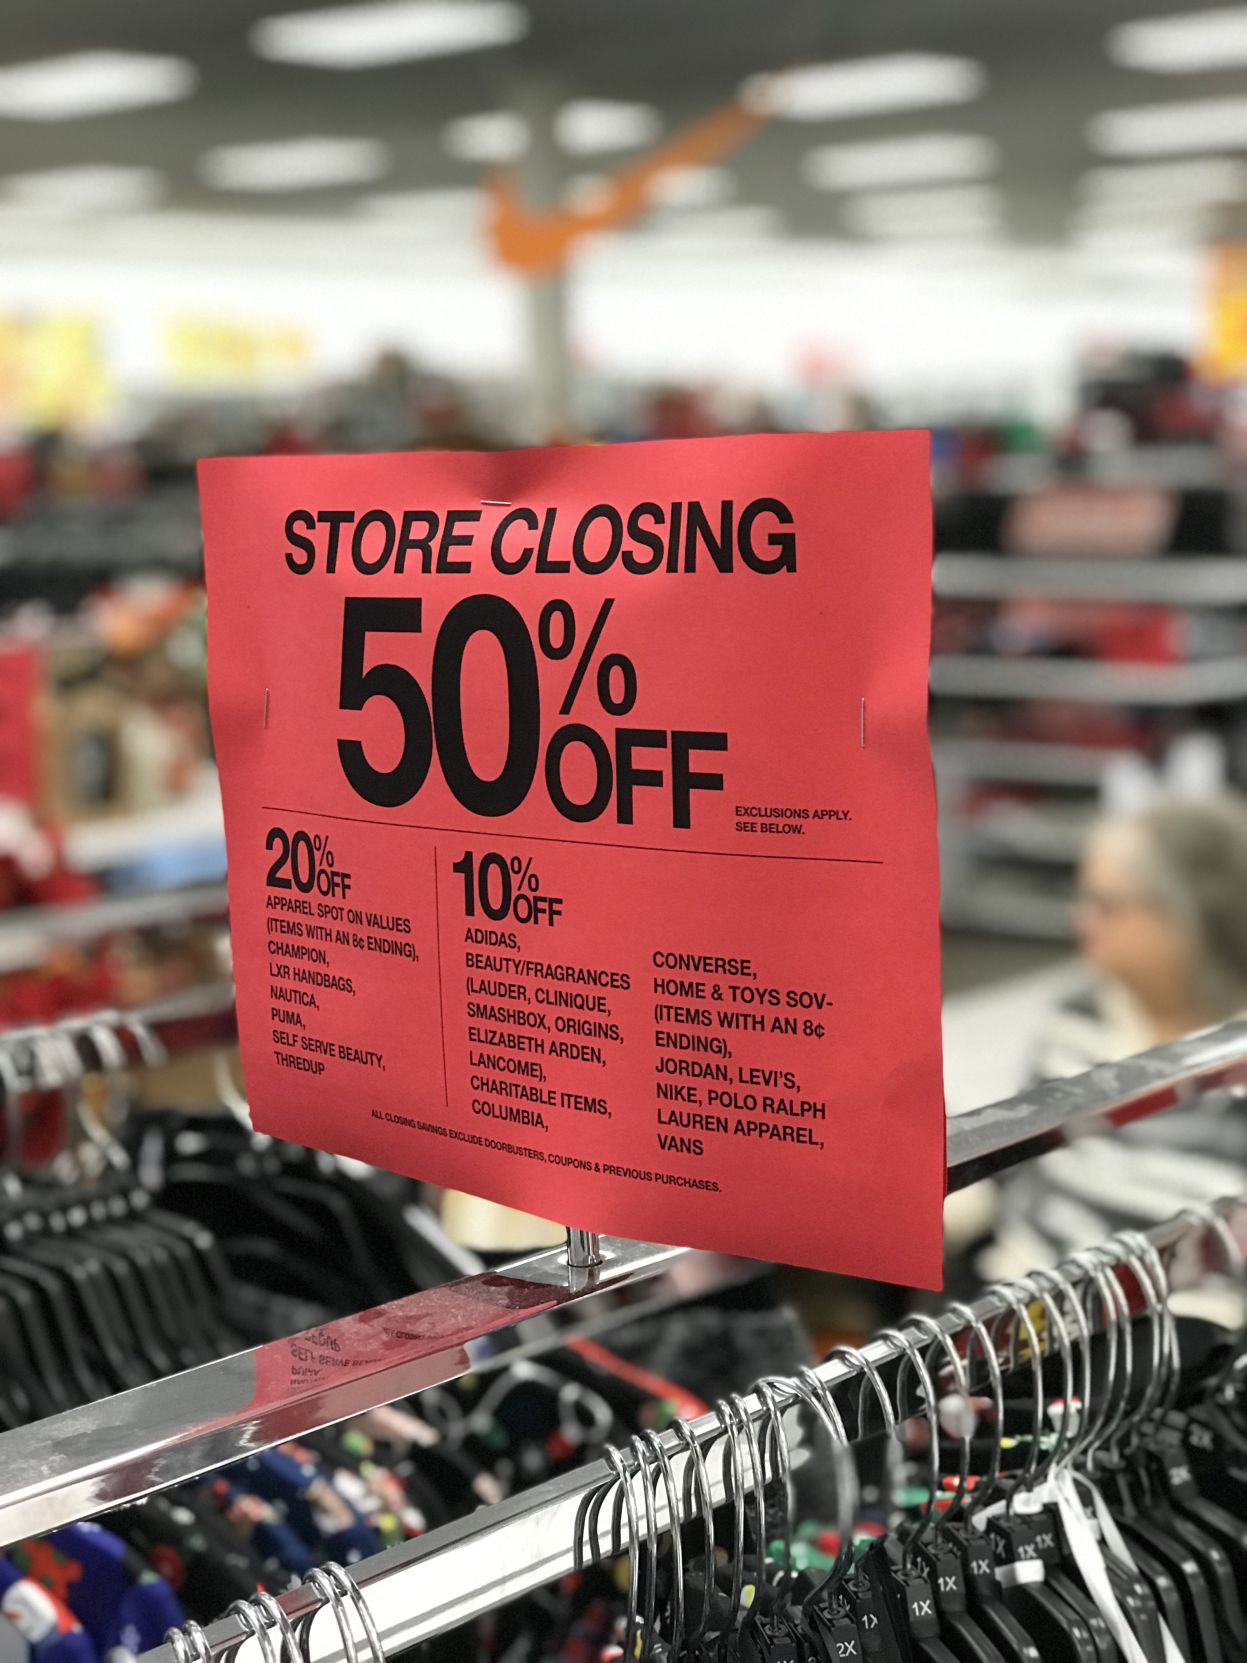 STAGE store closing deals 